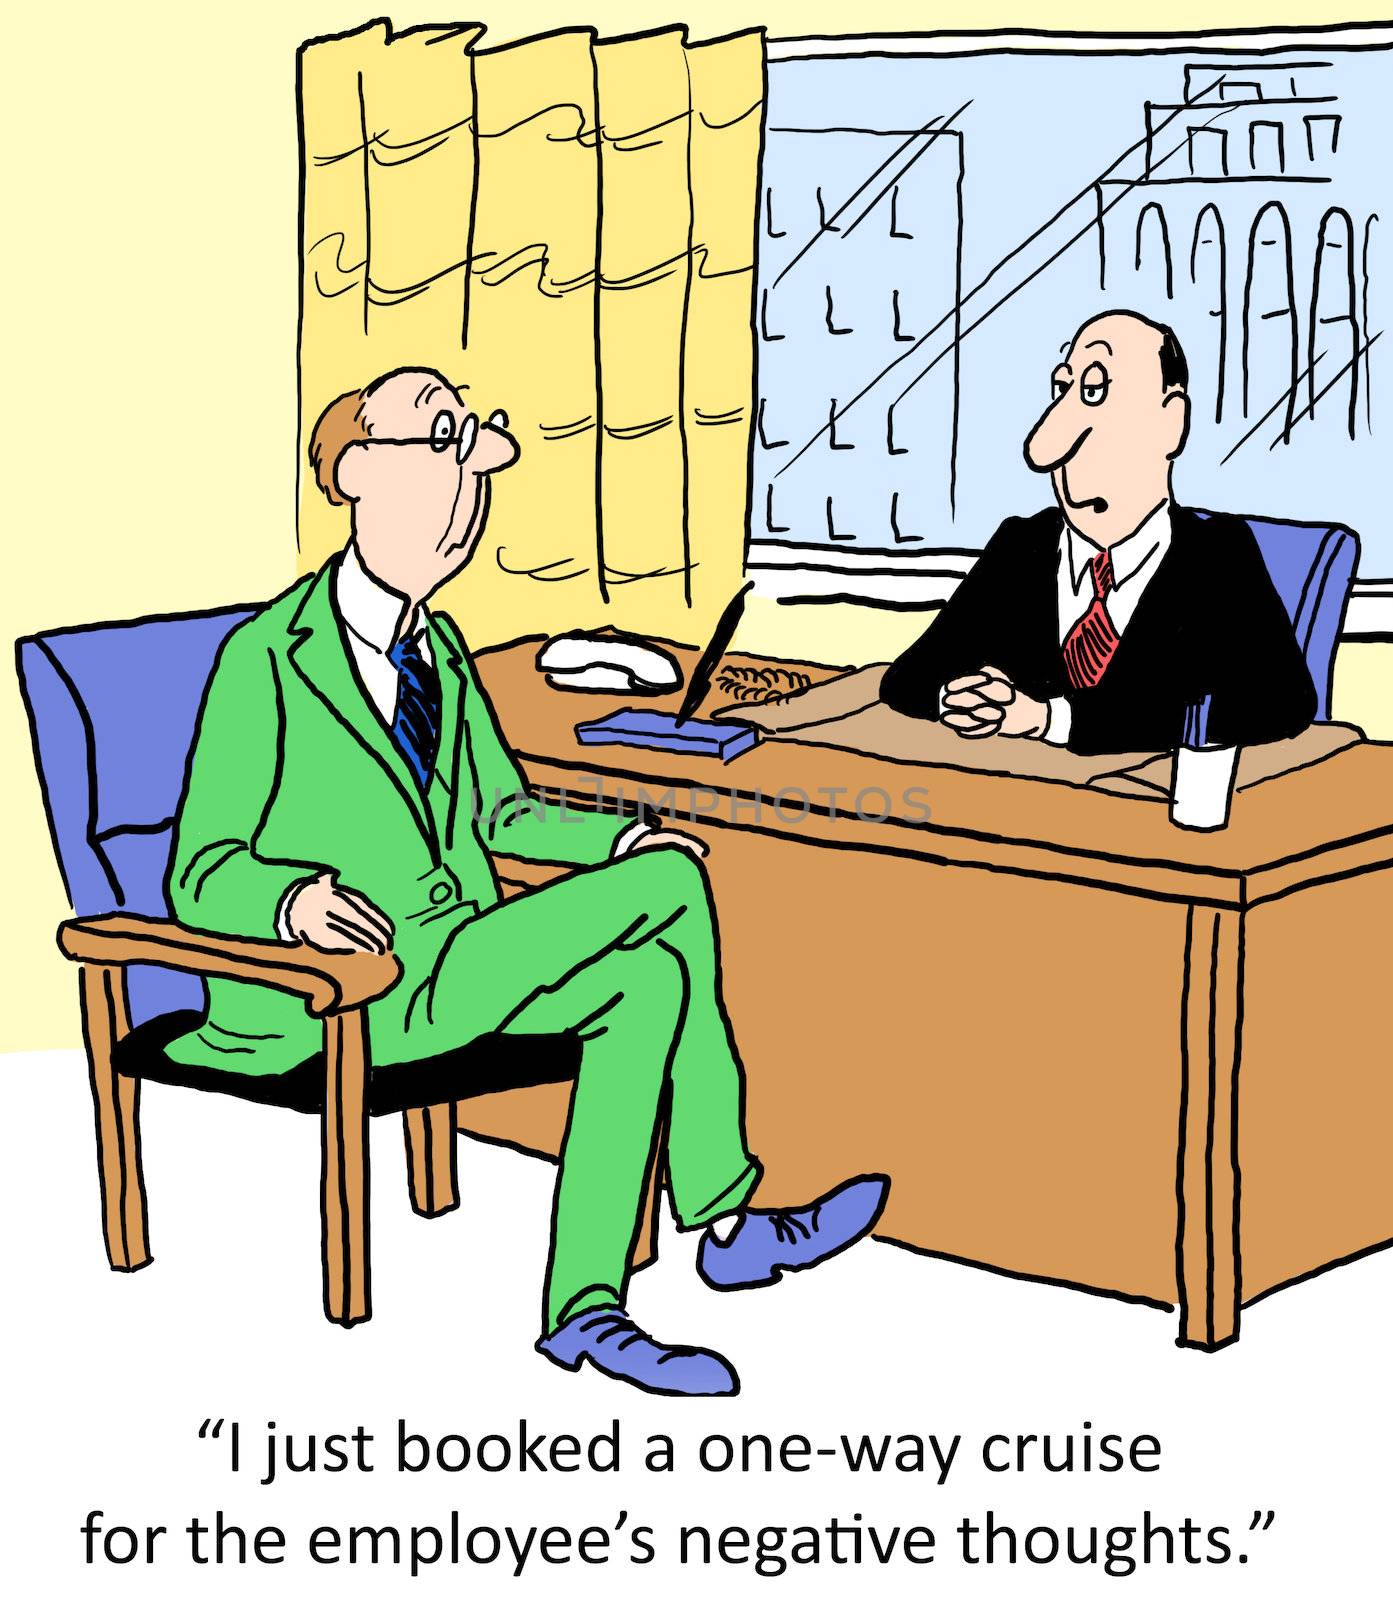 "I just booked a one way cruise for the employee's negative thoughts."